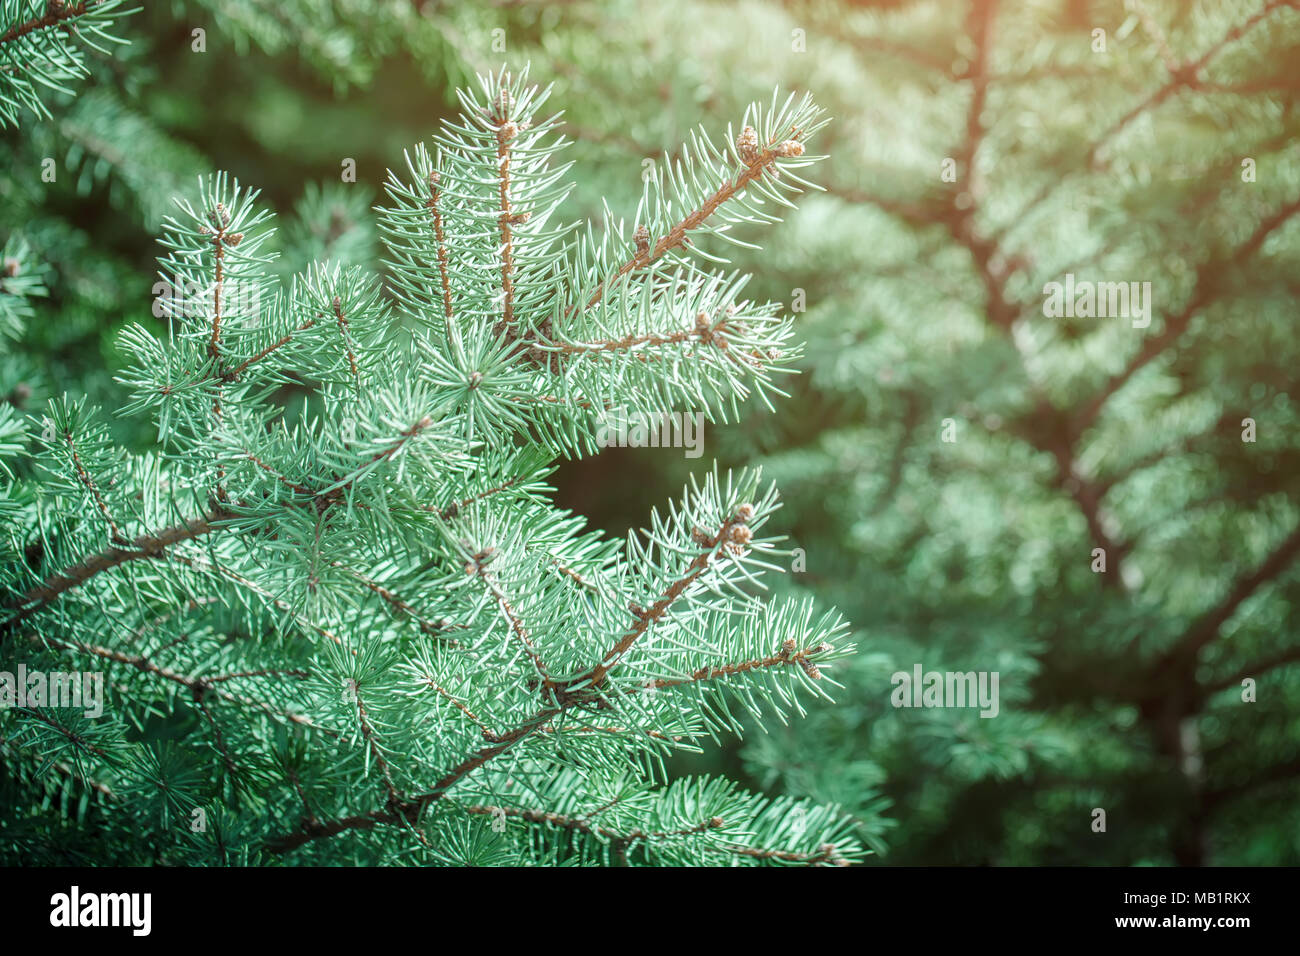 Green spruce branches as a textured background. Green spruce blue spruce. Selective focus. Stock Photo